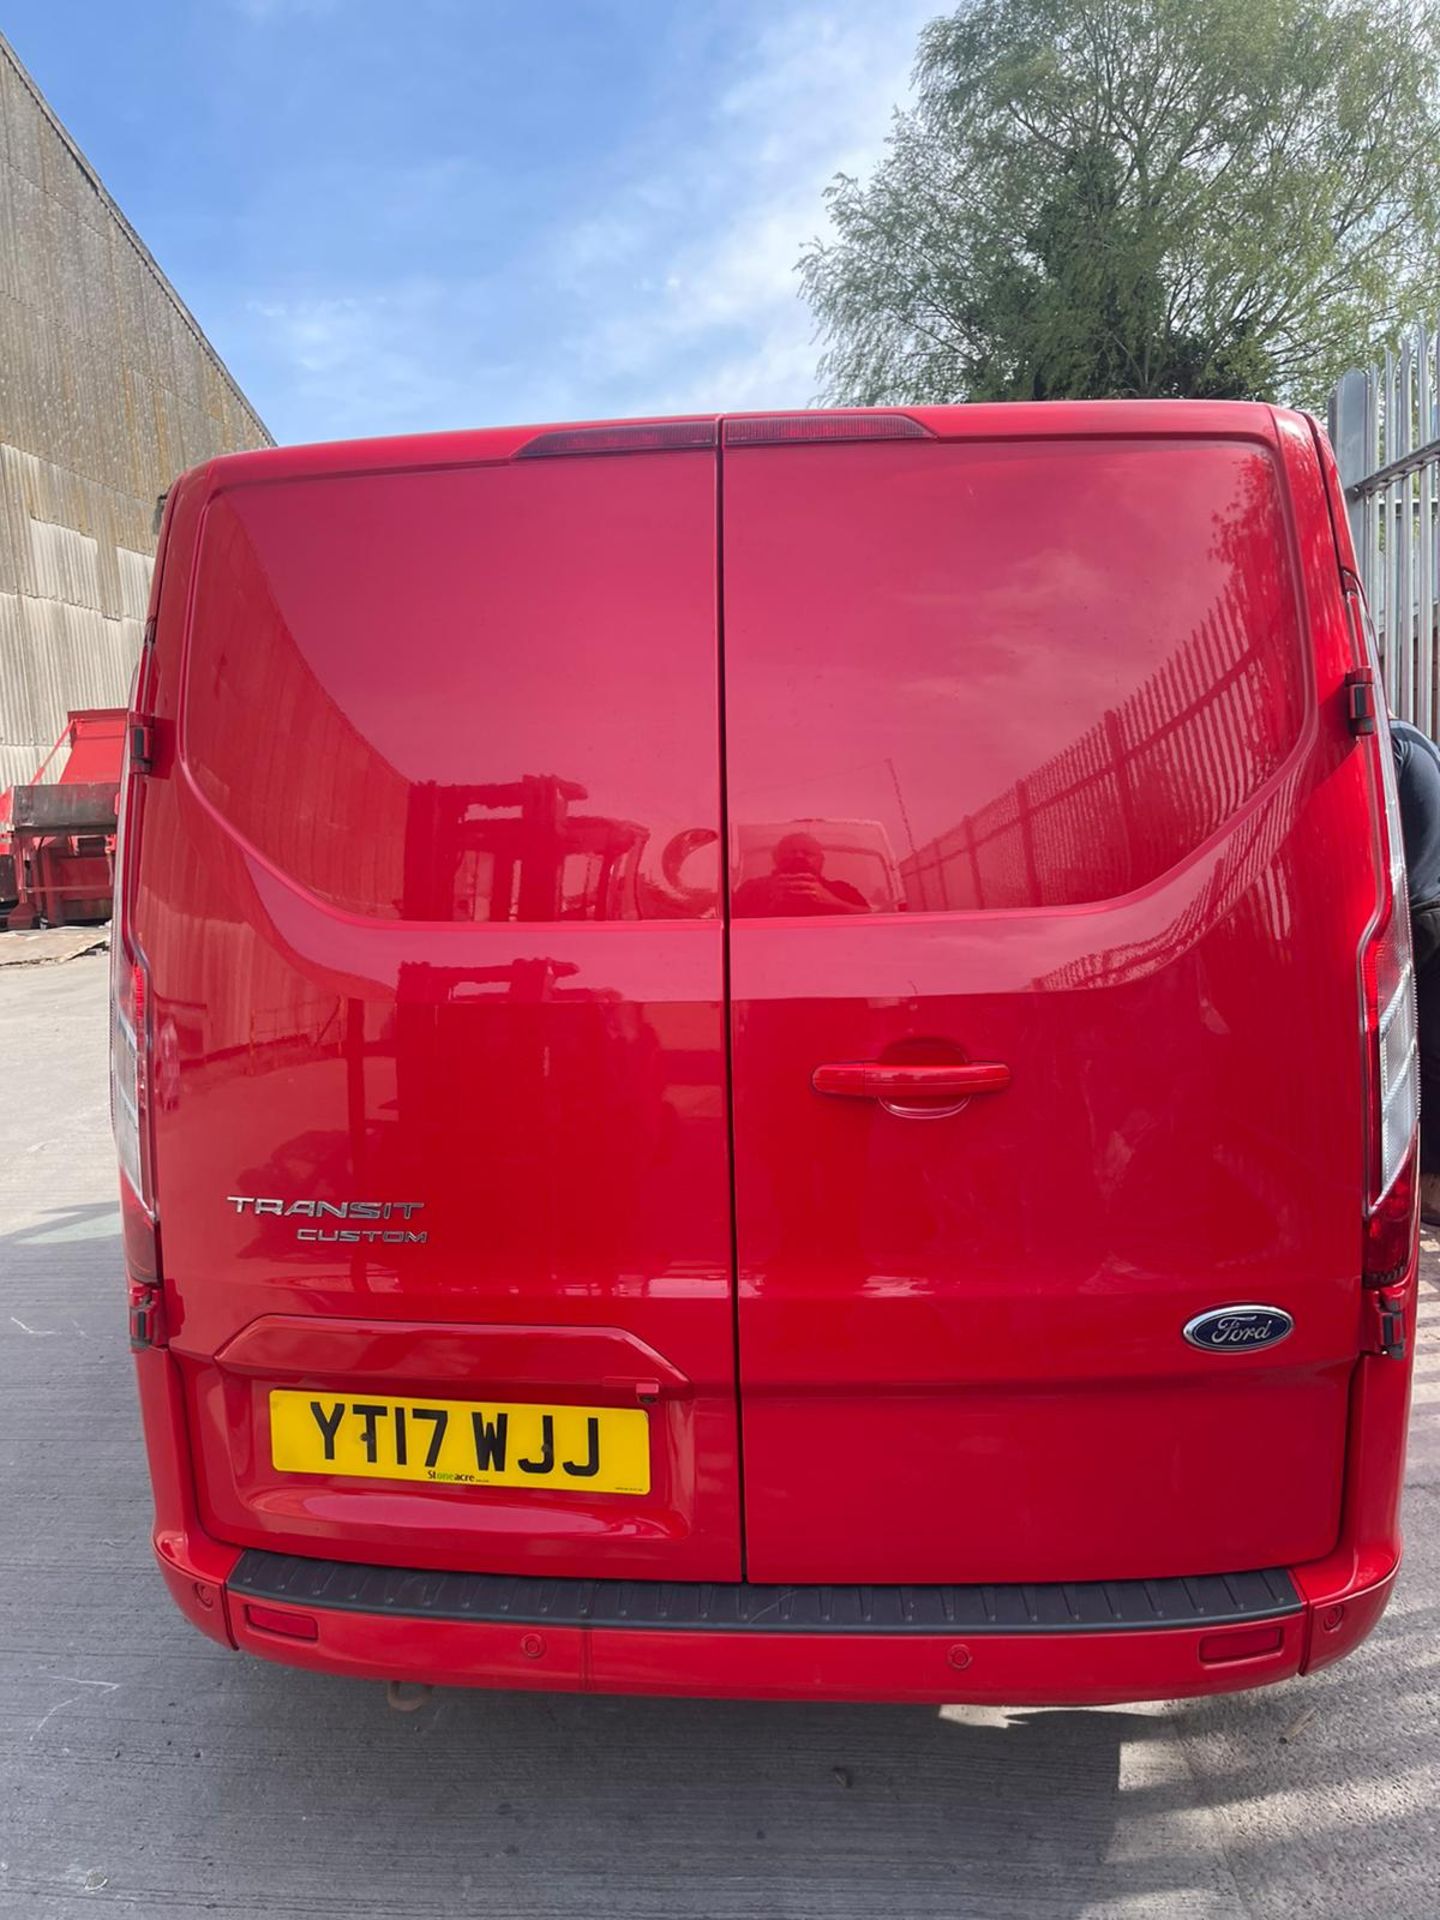 YT17 WJJ - FORD TRANSIT CUSTOM 290 L1 DIESEL FWD - 2.0 TDCi 170ps Low Roof Limited Van   Colour: Red - Image 4 of 7